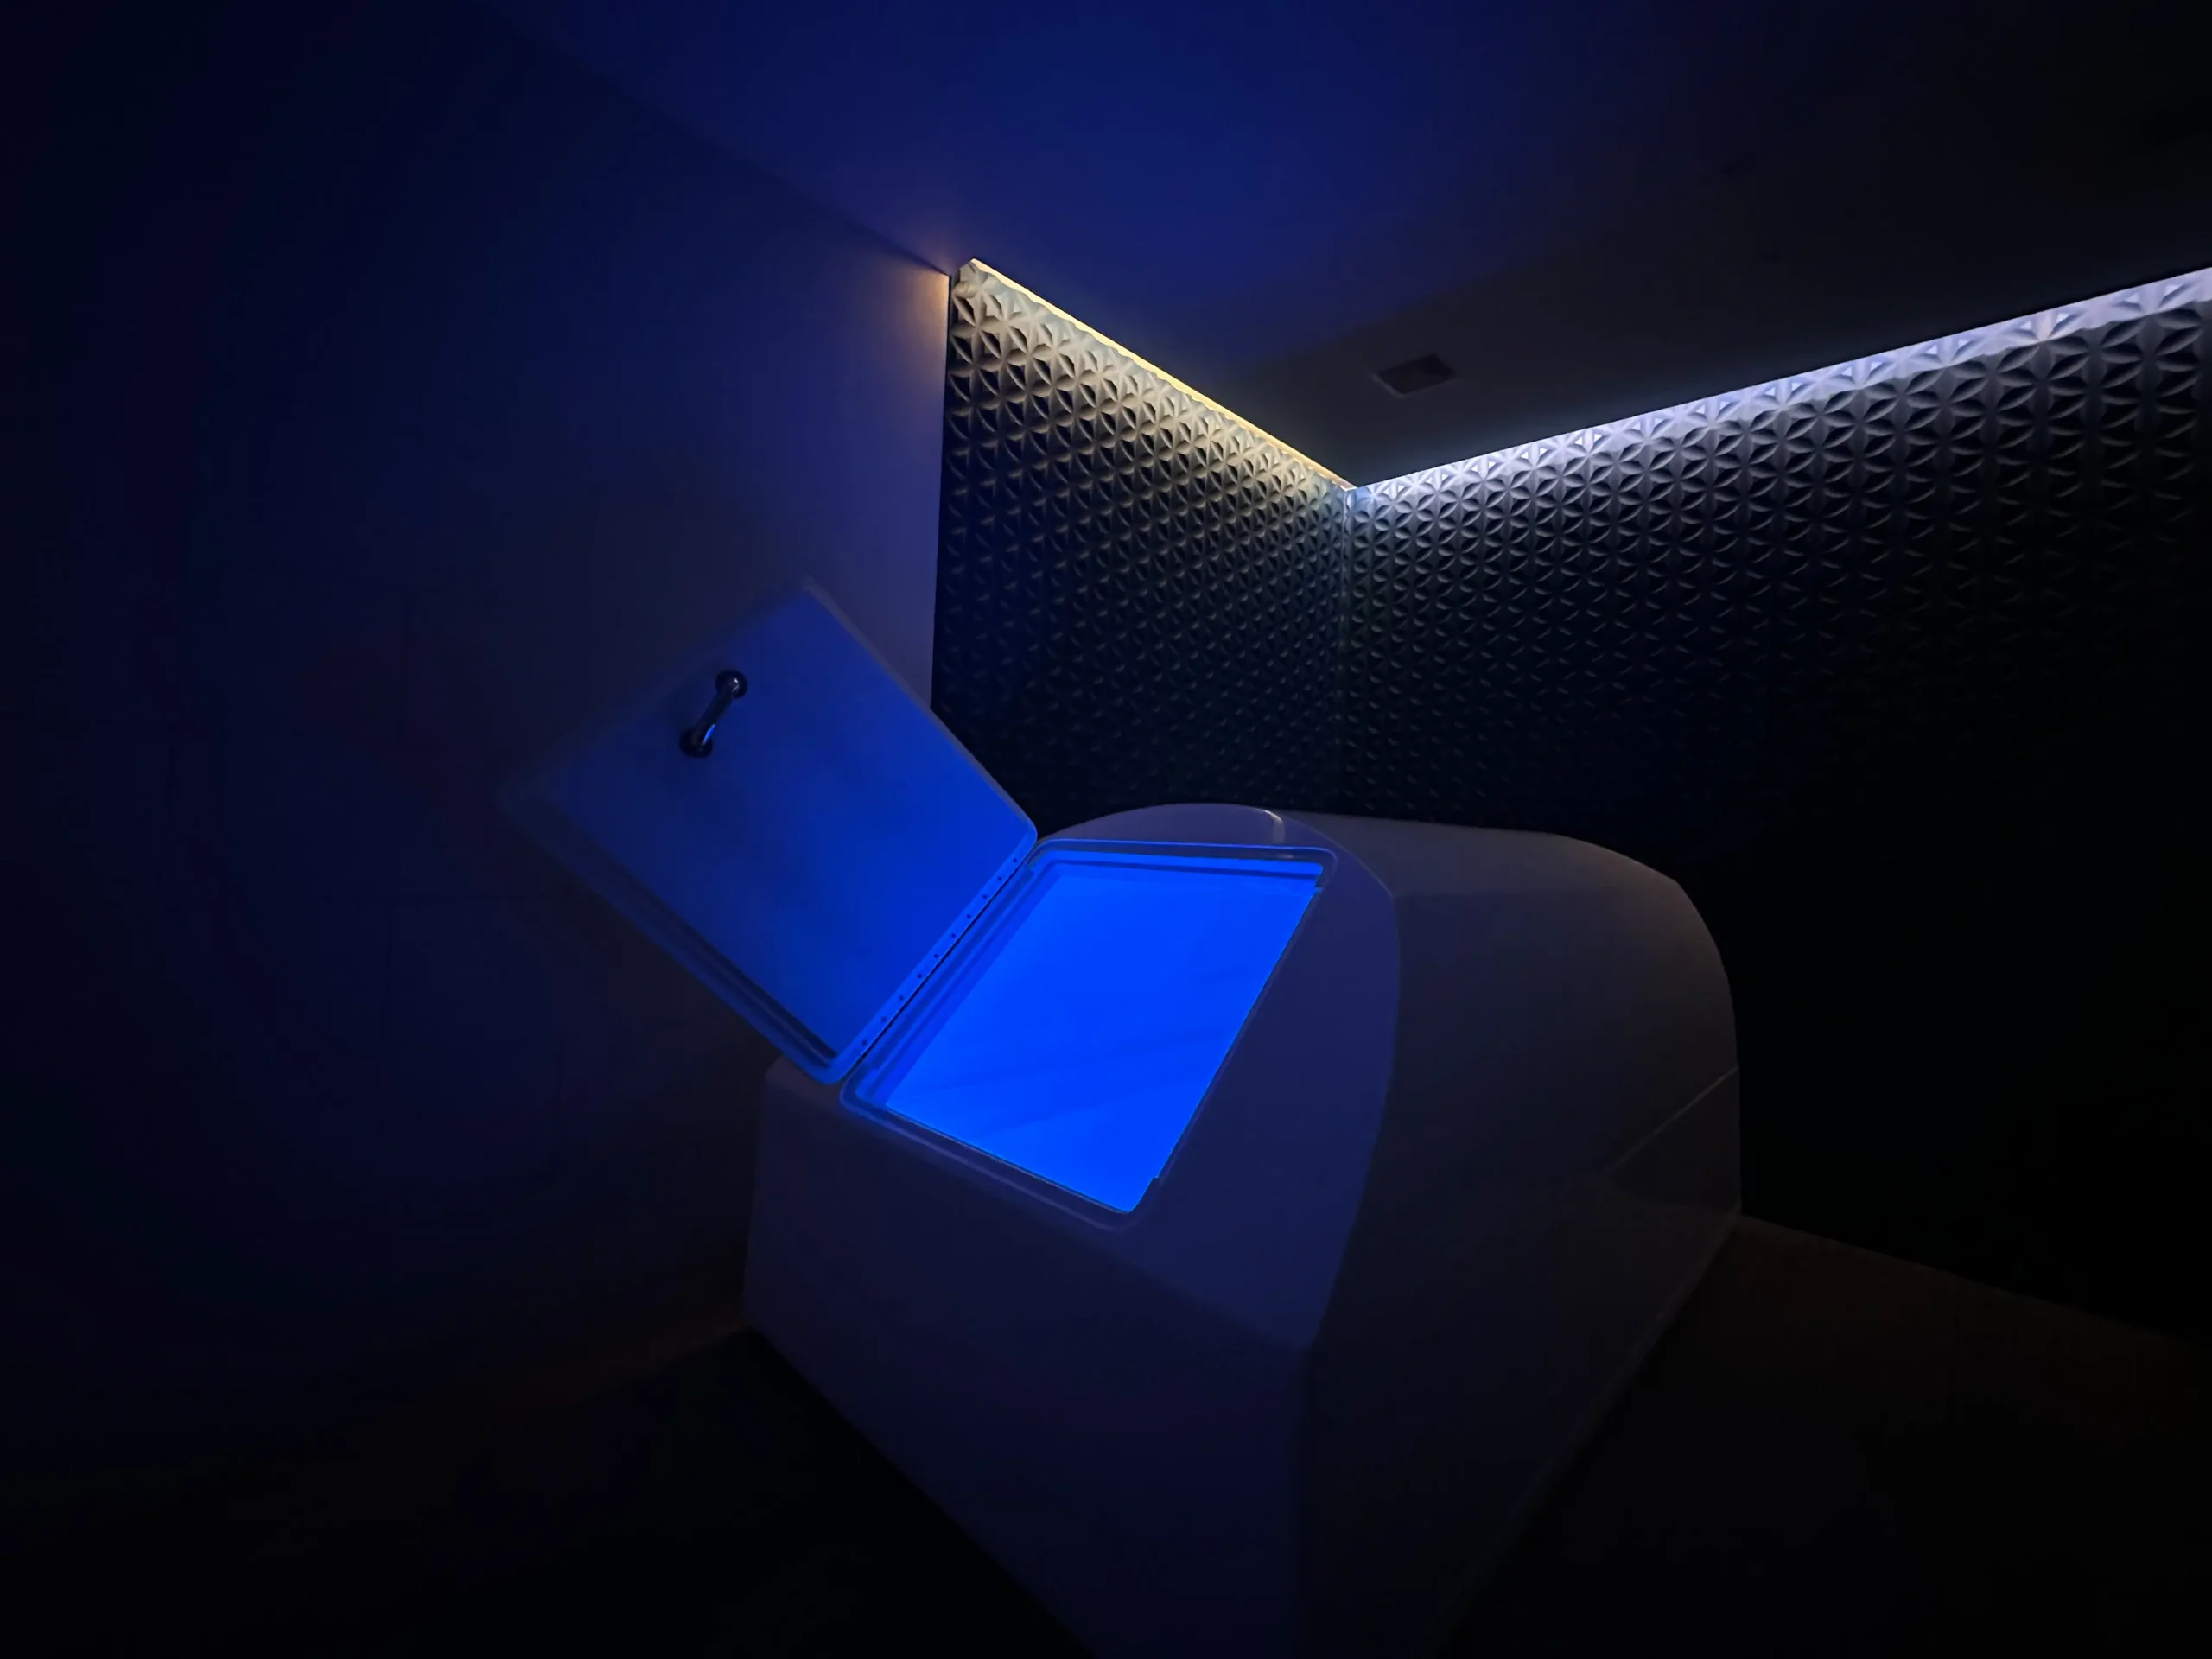 The exterior view of a modern zero-gravity flotation therapy tank in a dimly lit room with textured walls, set in Solace Float. This tank is designed for deep relaxation, reducing sensory input to a minimum to help achieve a meditative state.